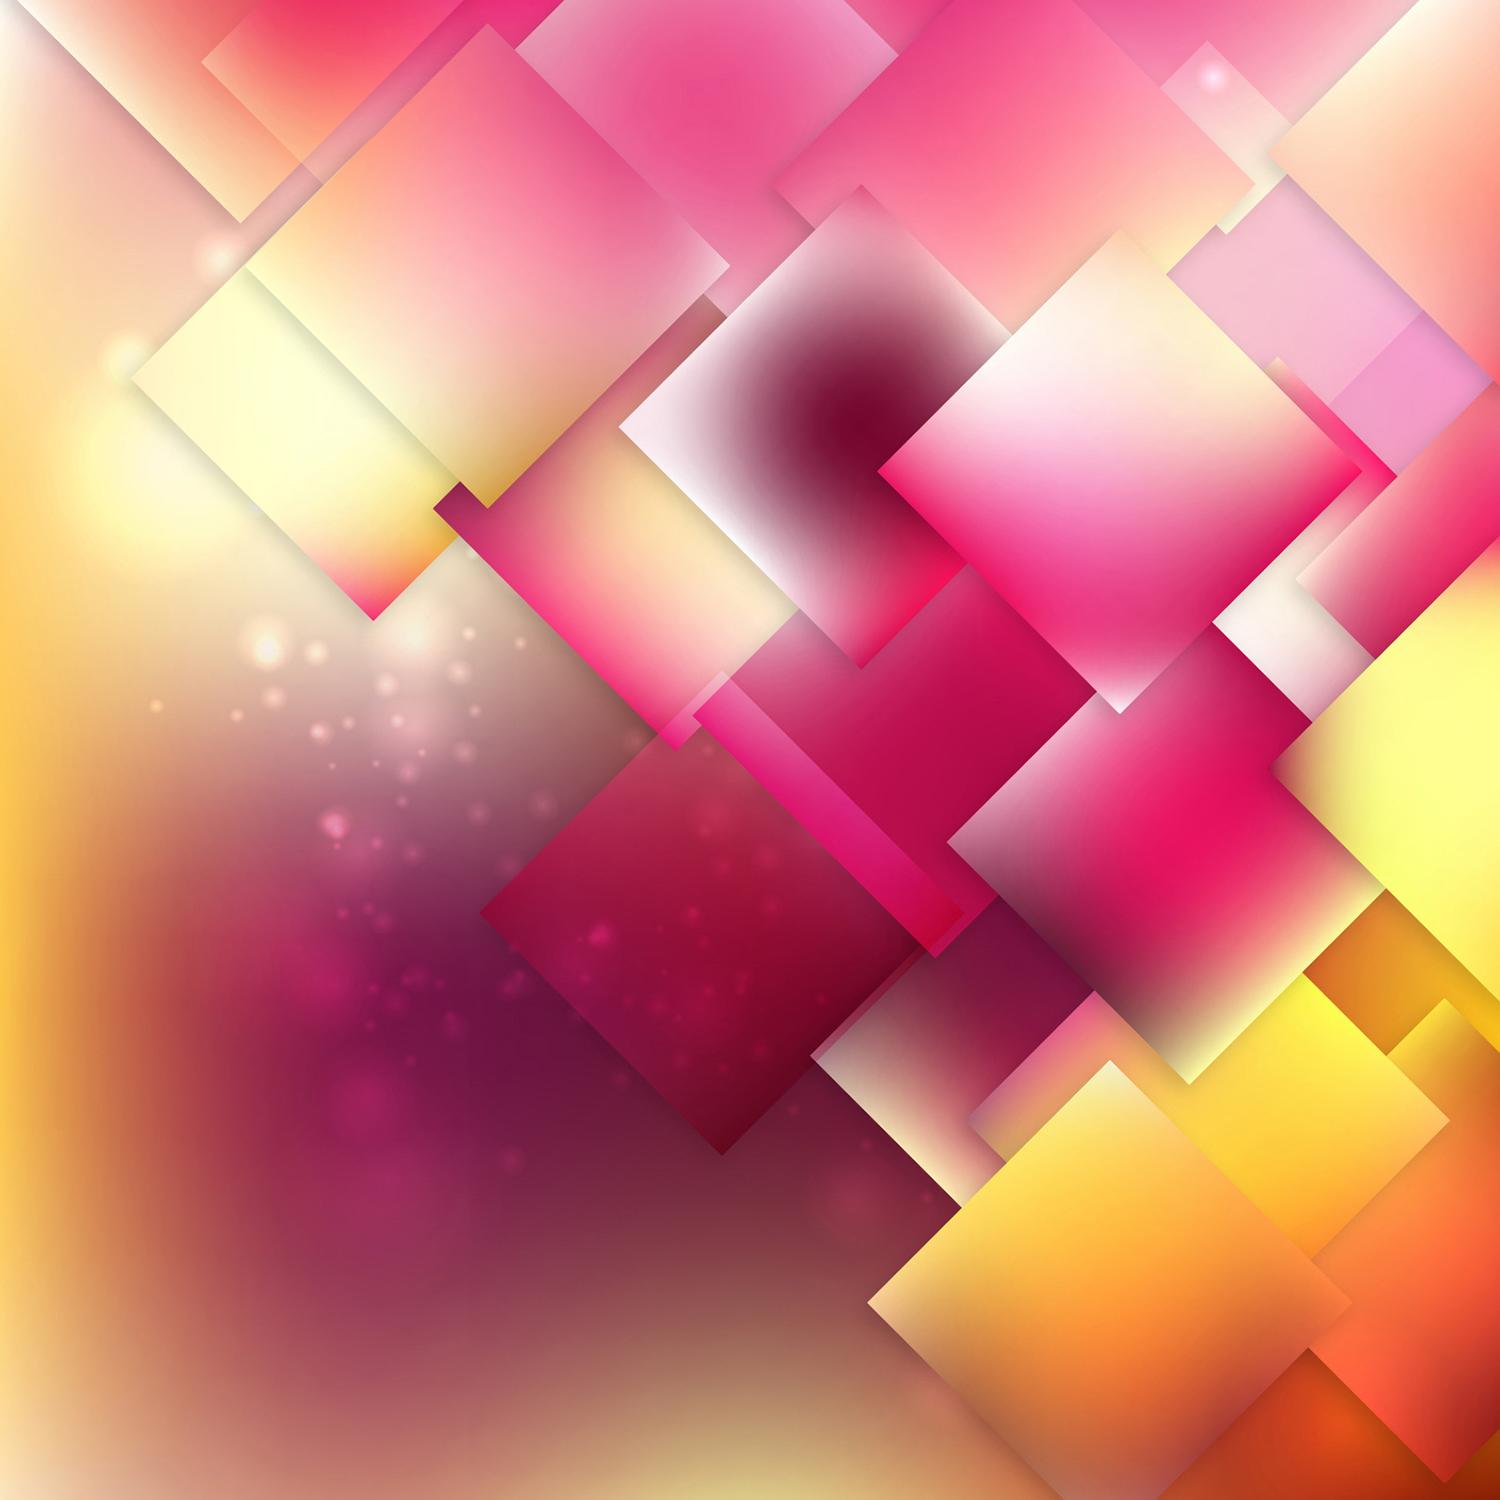 Buy 3D Abstract Pink with Yellow Orange Wallpaper Online in India at